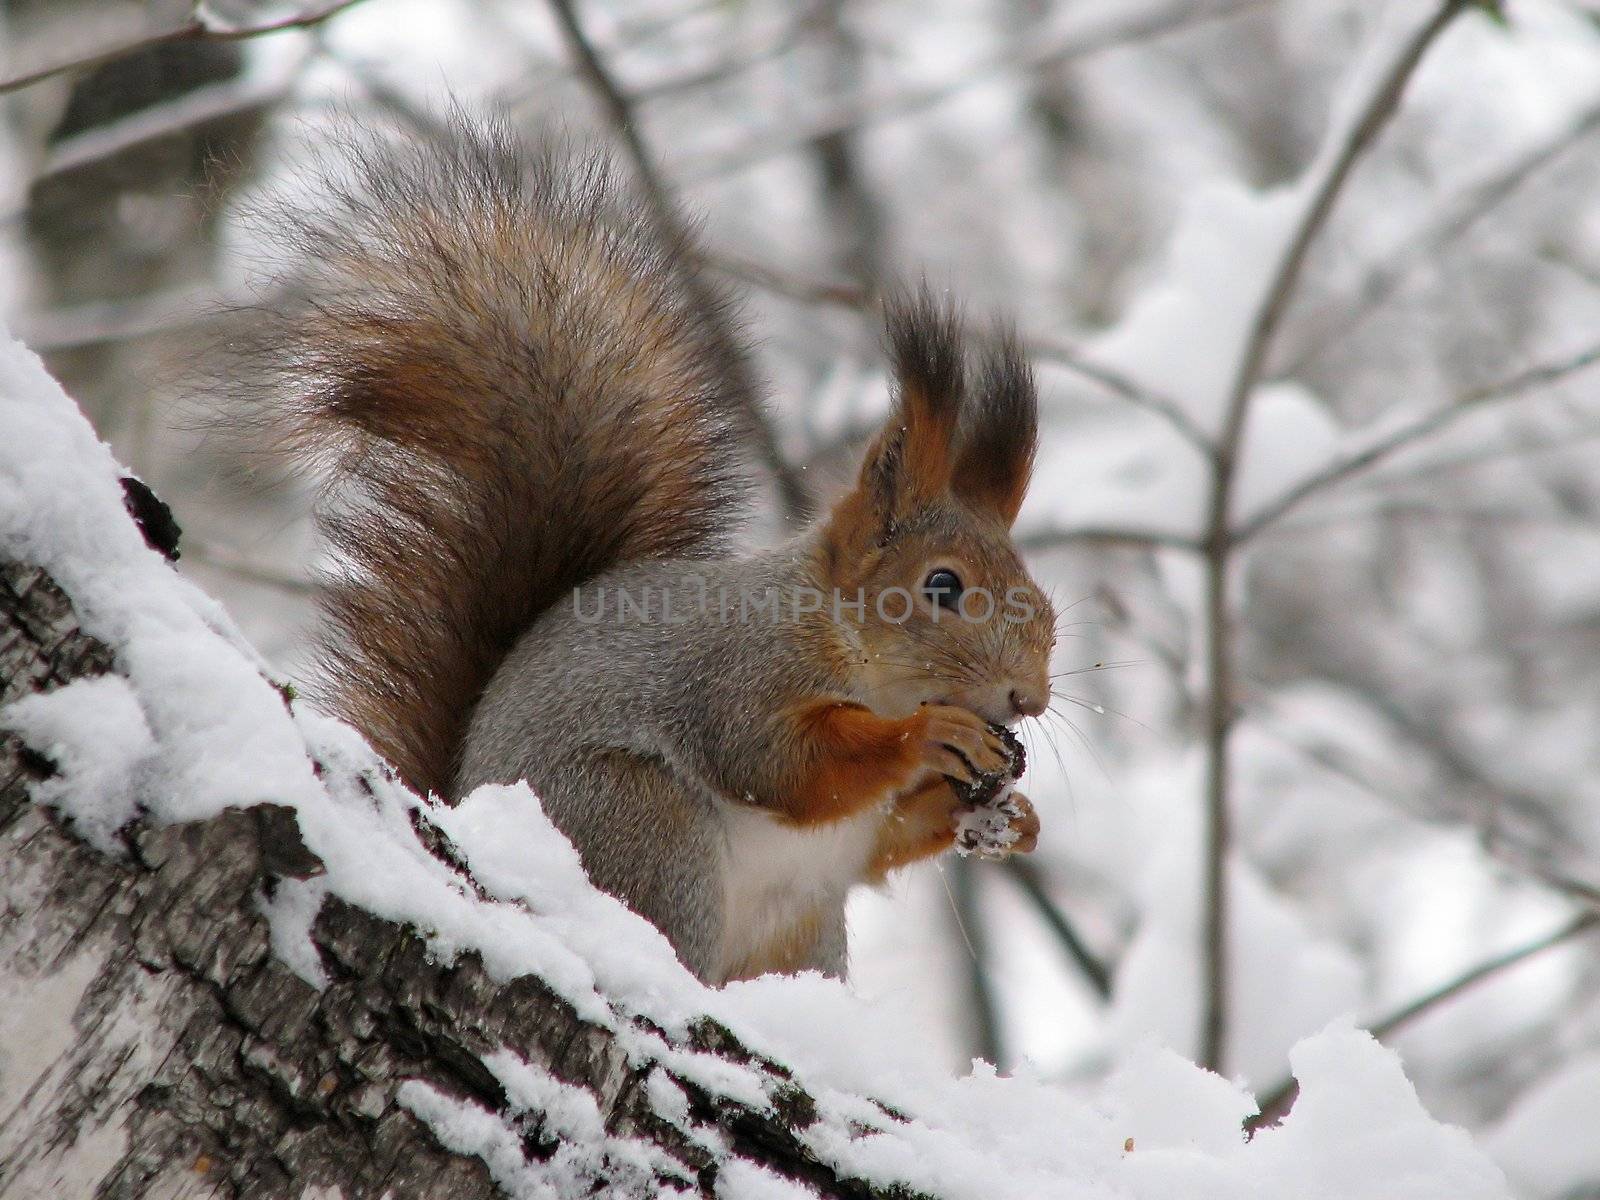 The squirrel sitting on a snow-covered birch